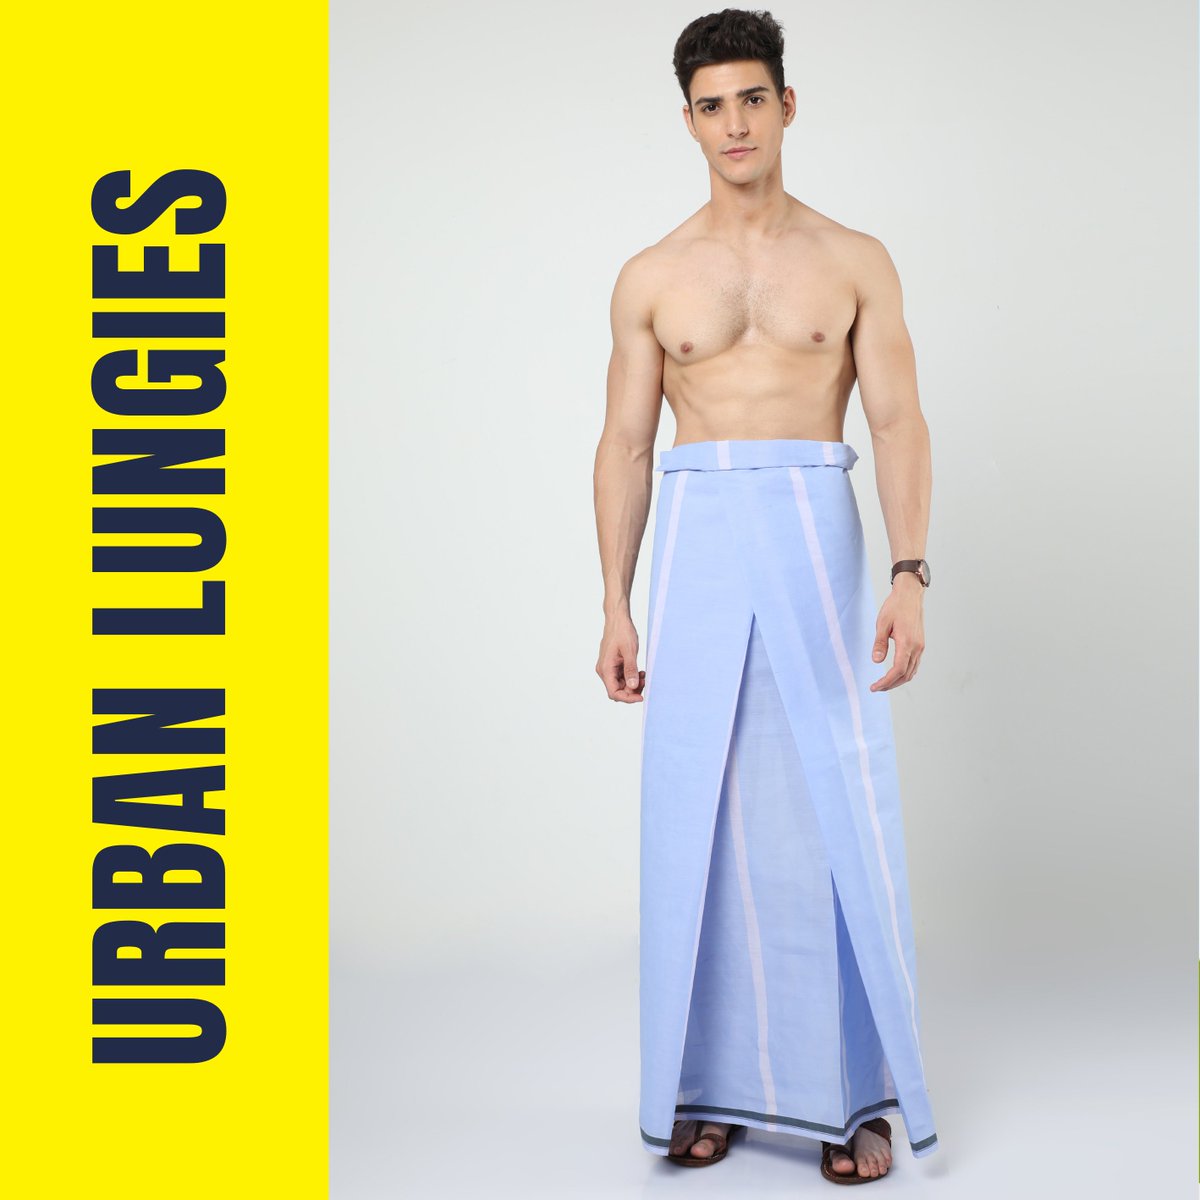 🎉 Tag your friends and spread the word! Let's set the Twitterverse ablaze with our fashionable lungi love! 💃💙 #LungiFashion #TrendyTradition #StyleStatement #ComfortAndChic #FashionFiesta